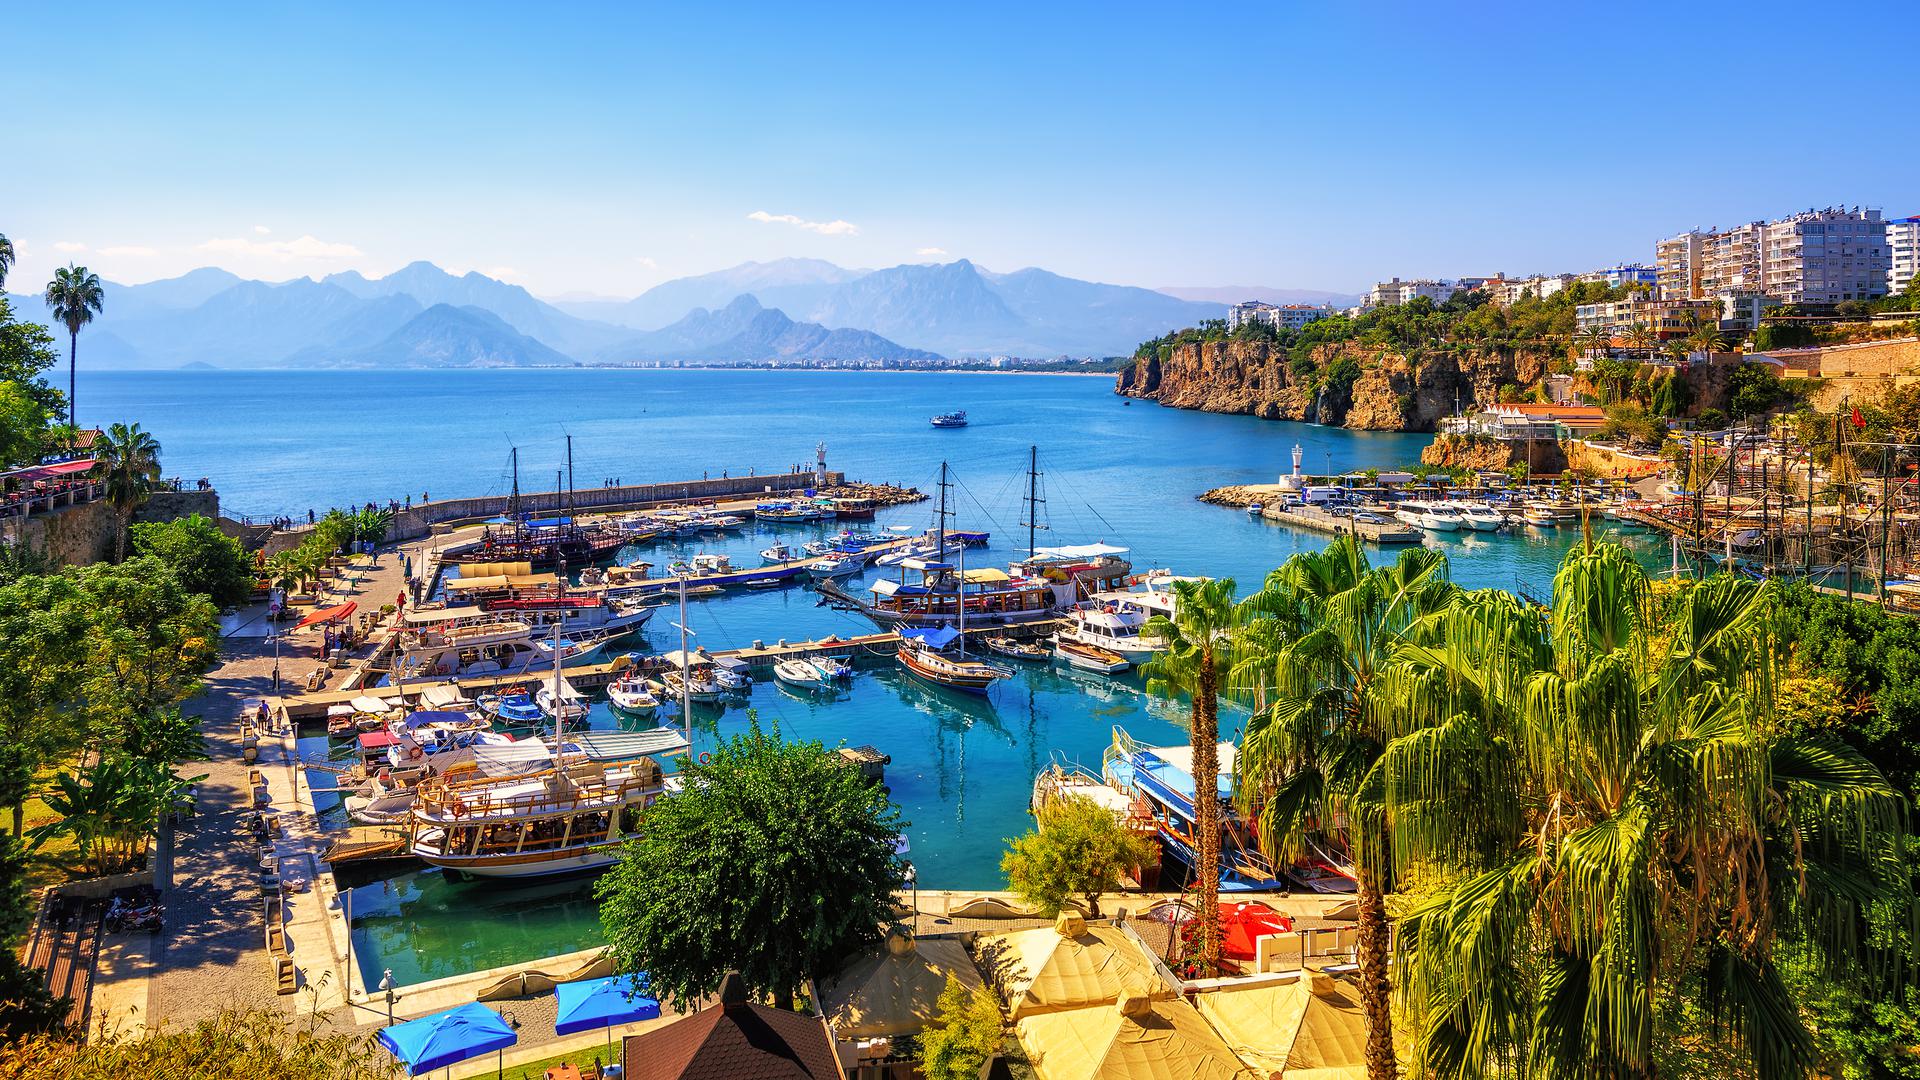 On the Turquoise Coast with a backdrop of the Taurus Mountains, Antalya in Turkey makes a good budget holiday destination in 2023